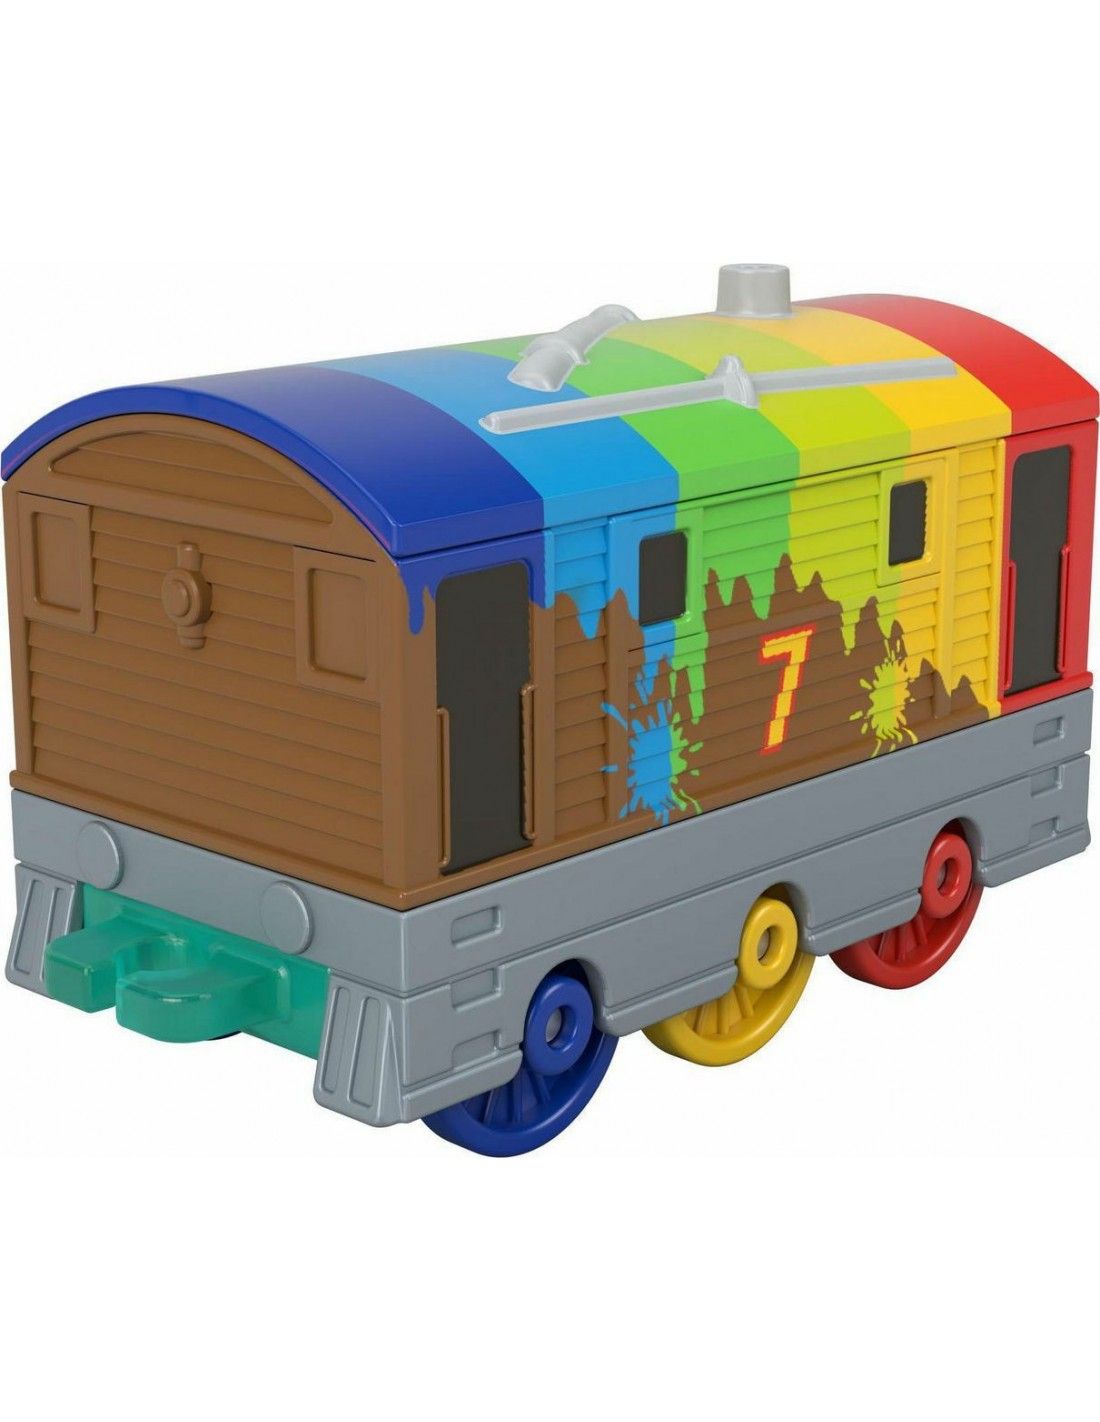 Fisher Price Thomas & Friends - TrackMaster Toby GYV65 (GCK93)